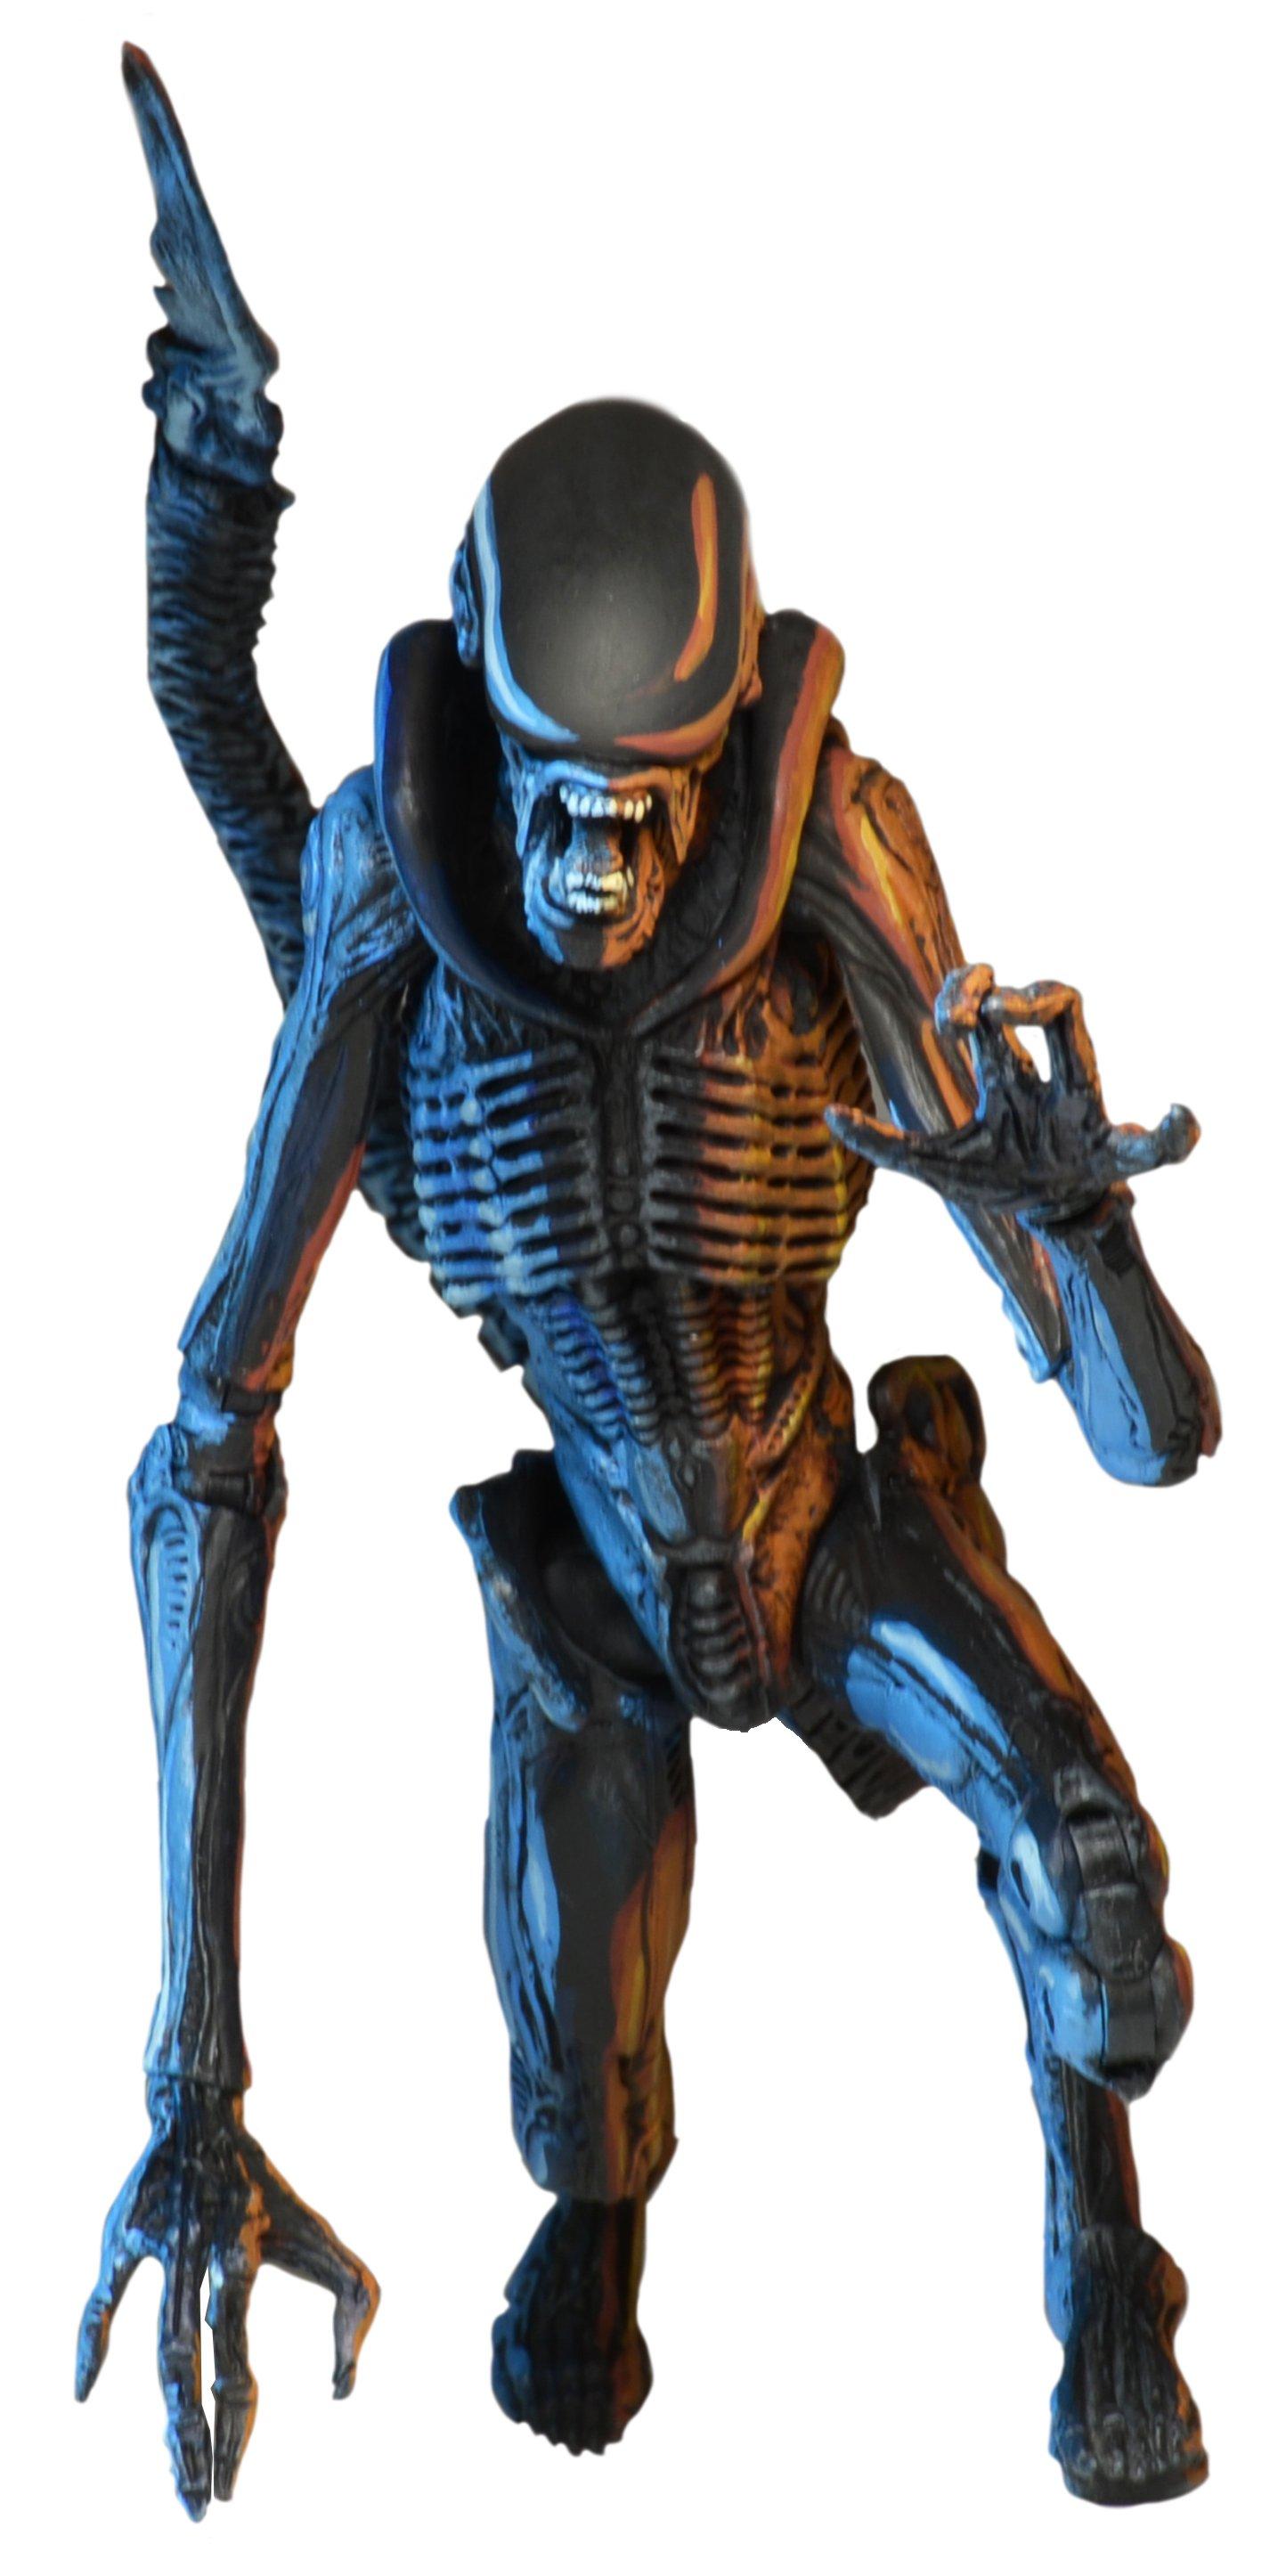 Alien 3 Dog Xenomorph Video Game Appearance Action Figure